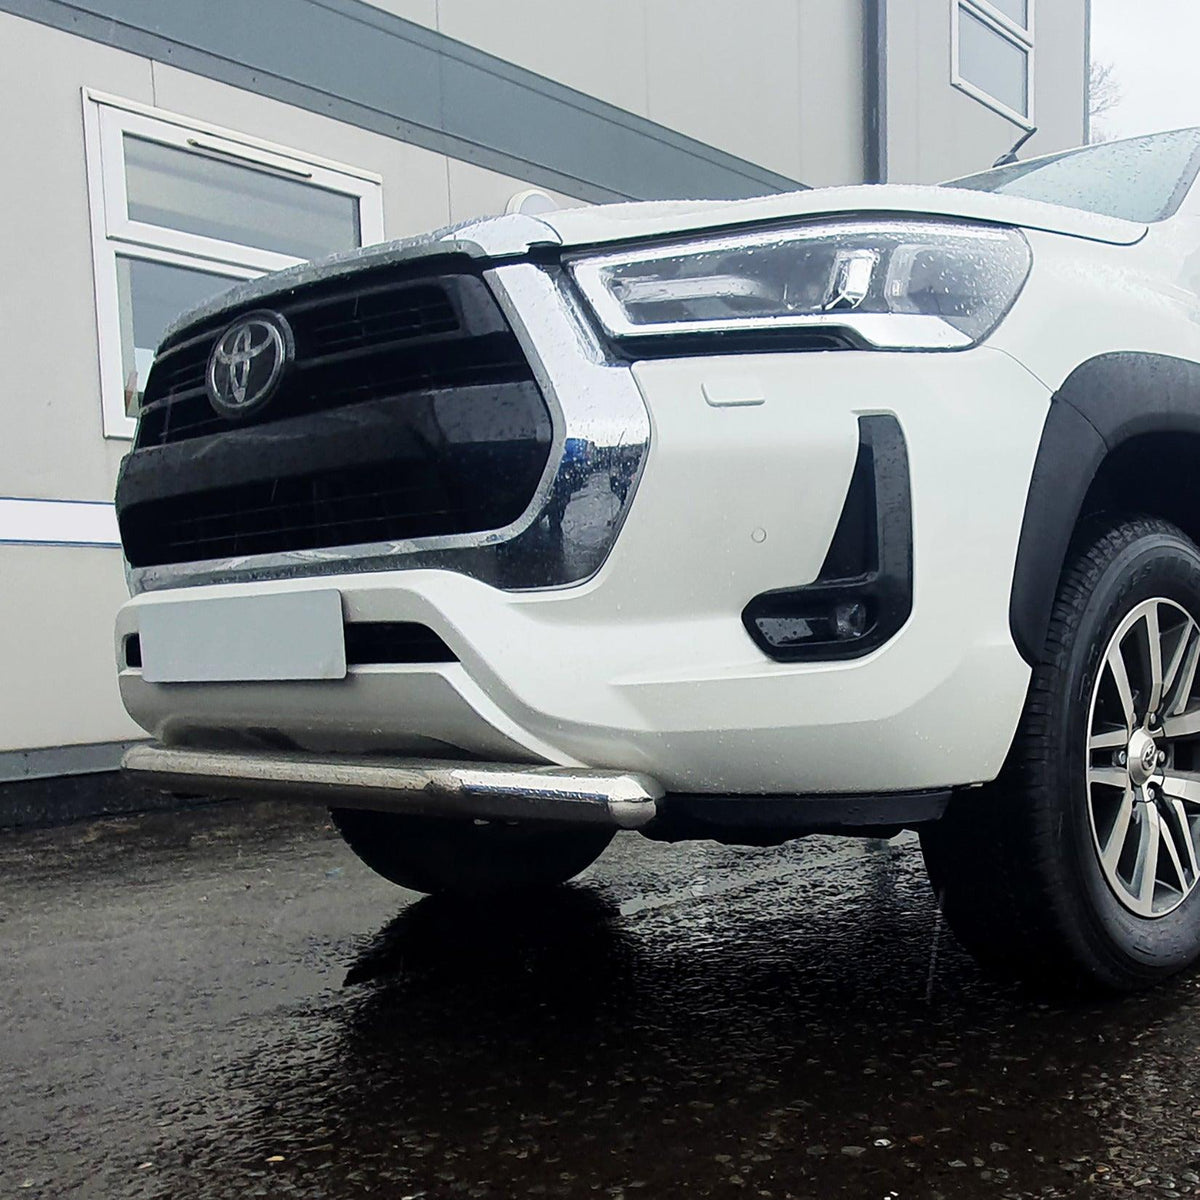 TOYOTA HILUX MK9 2019 ON - INVINCIBLE X SPOILER CITY BAR 70MM - STAINLESS STEEL - Storm Xccessories2